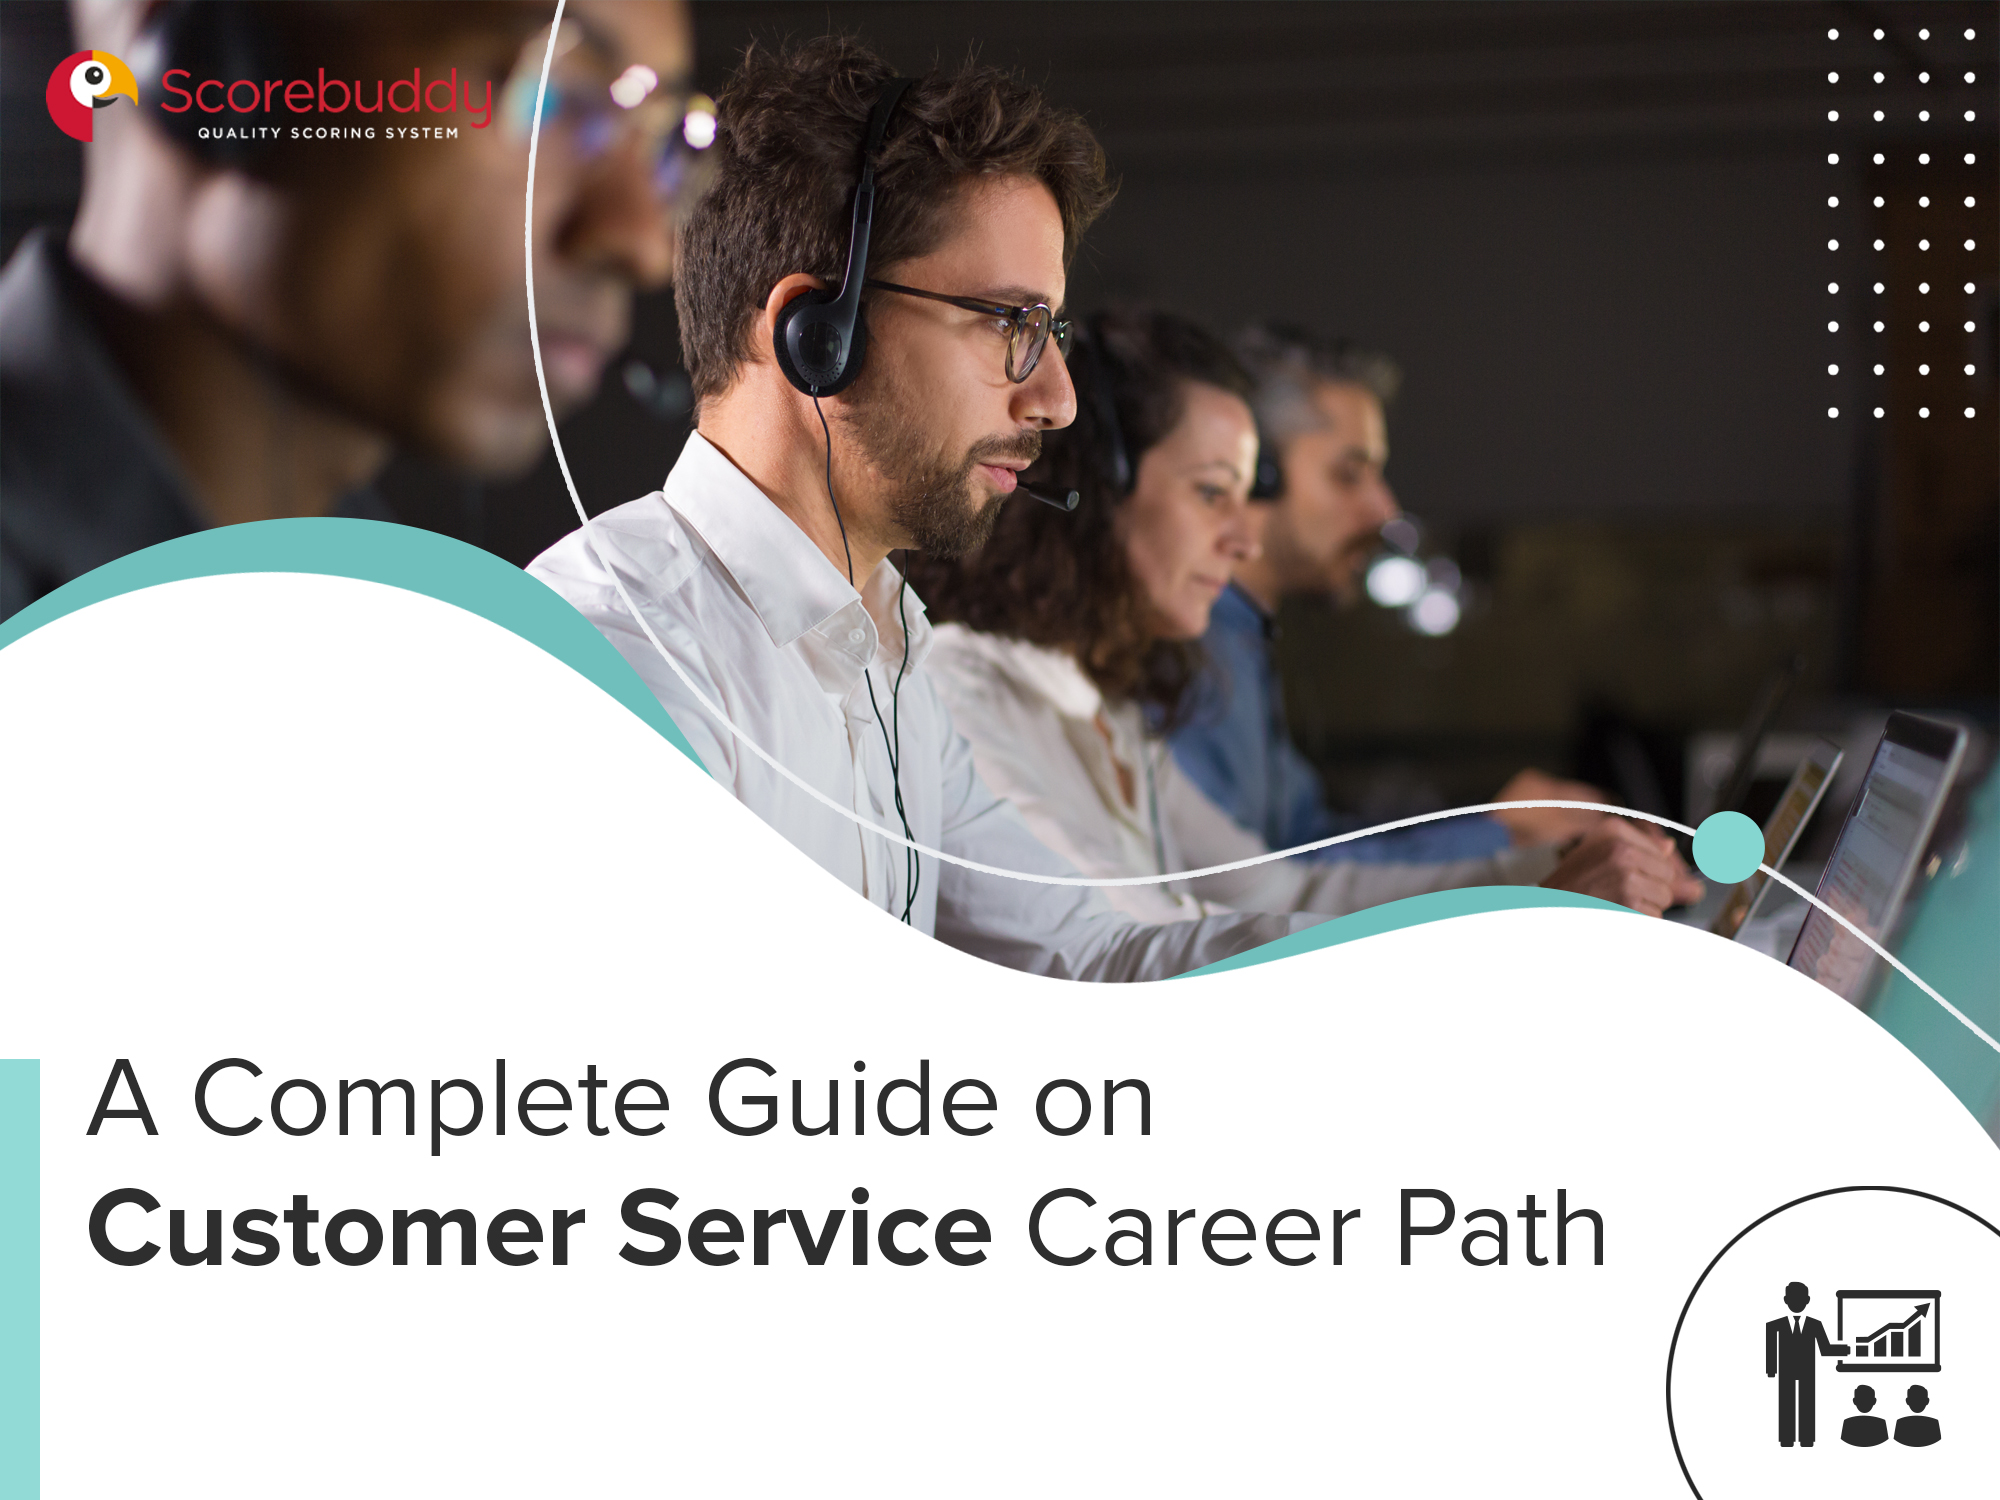 A Complete Guide on Customer Service Career Path